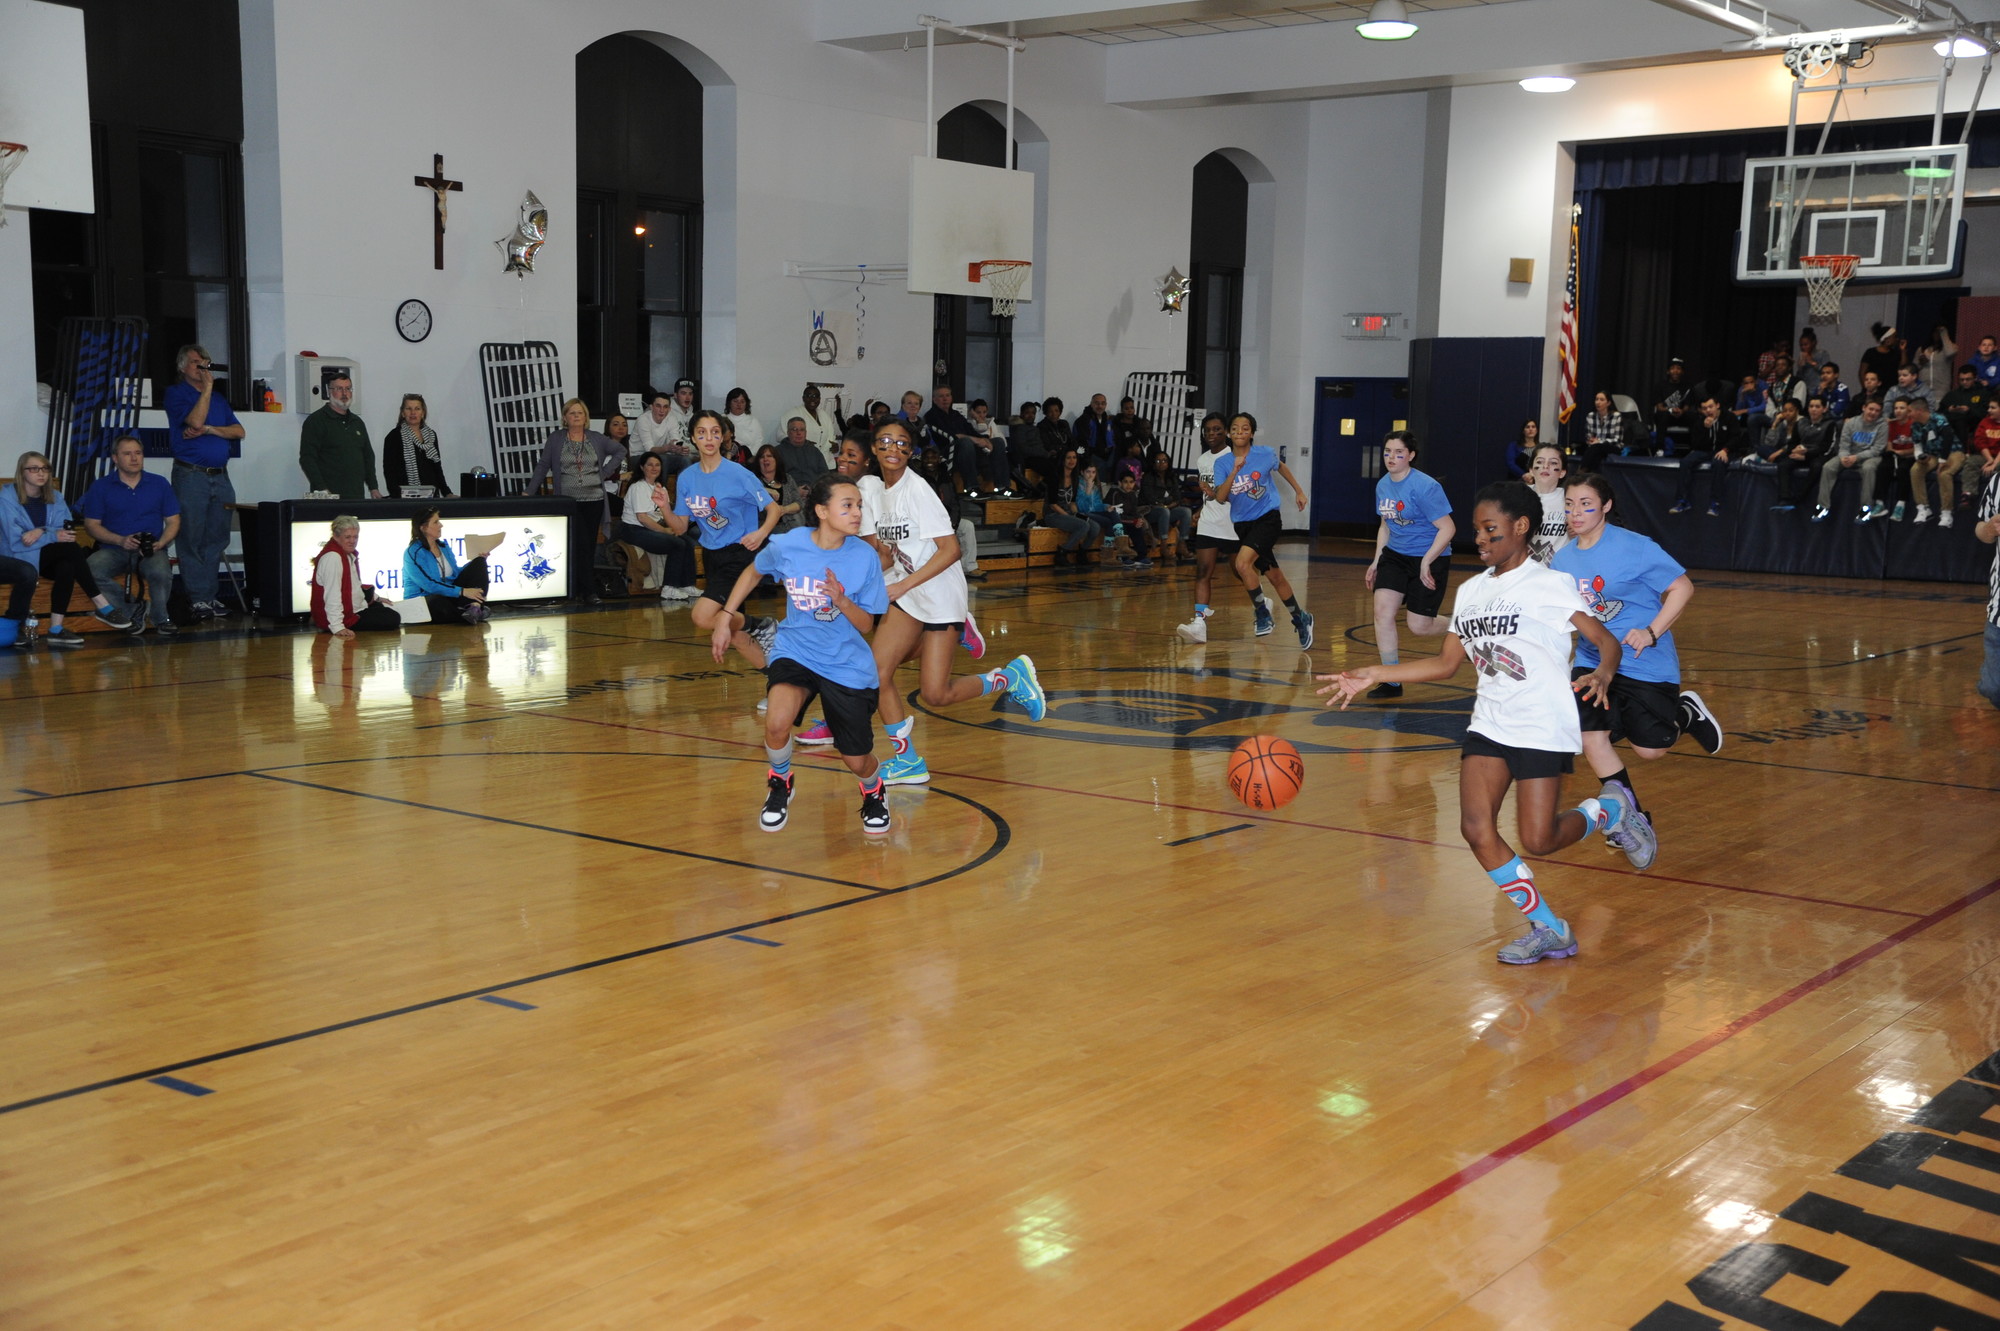 There was plenty of fast-paced action in the basketball game.